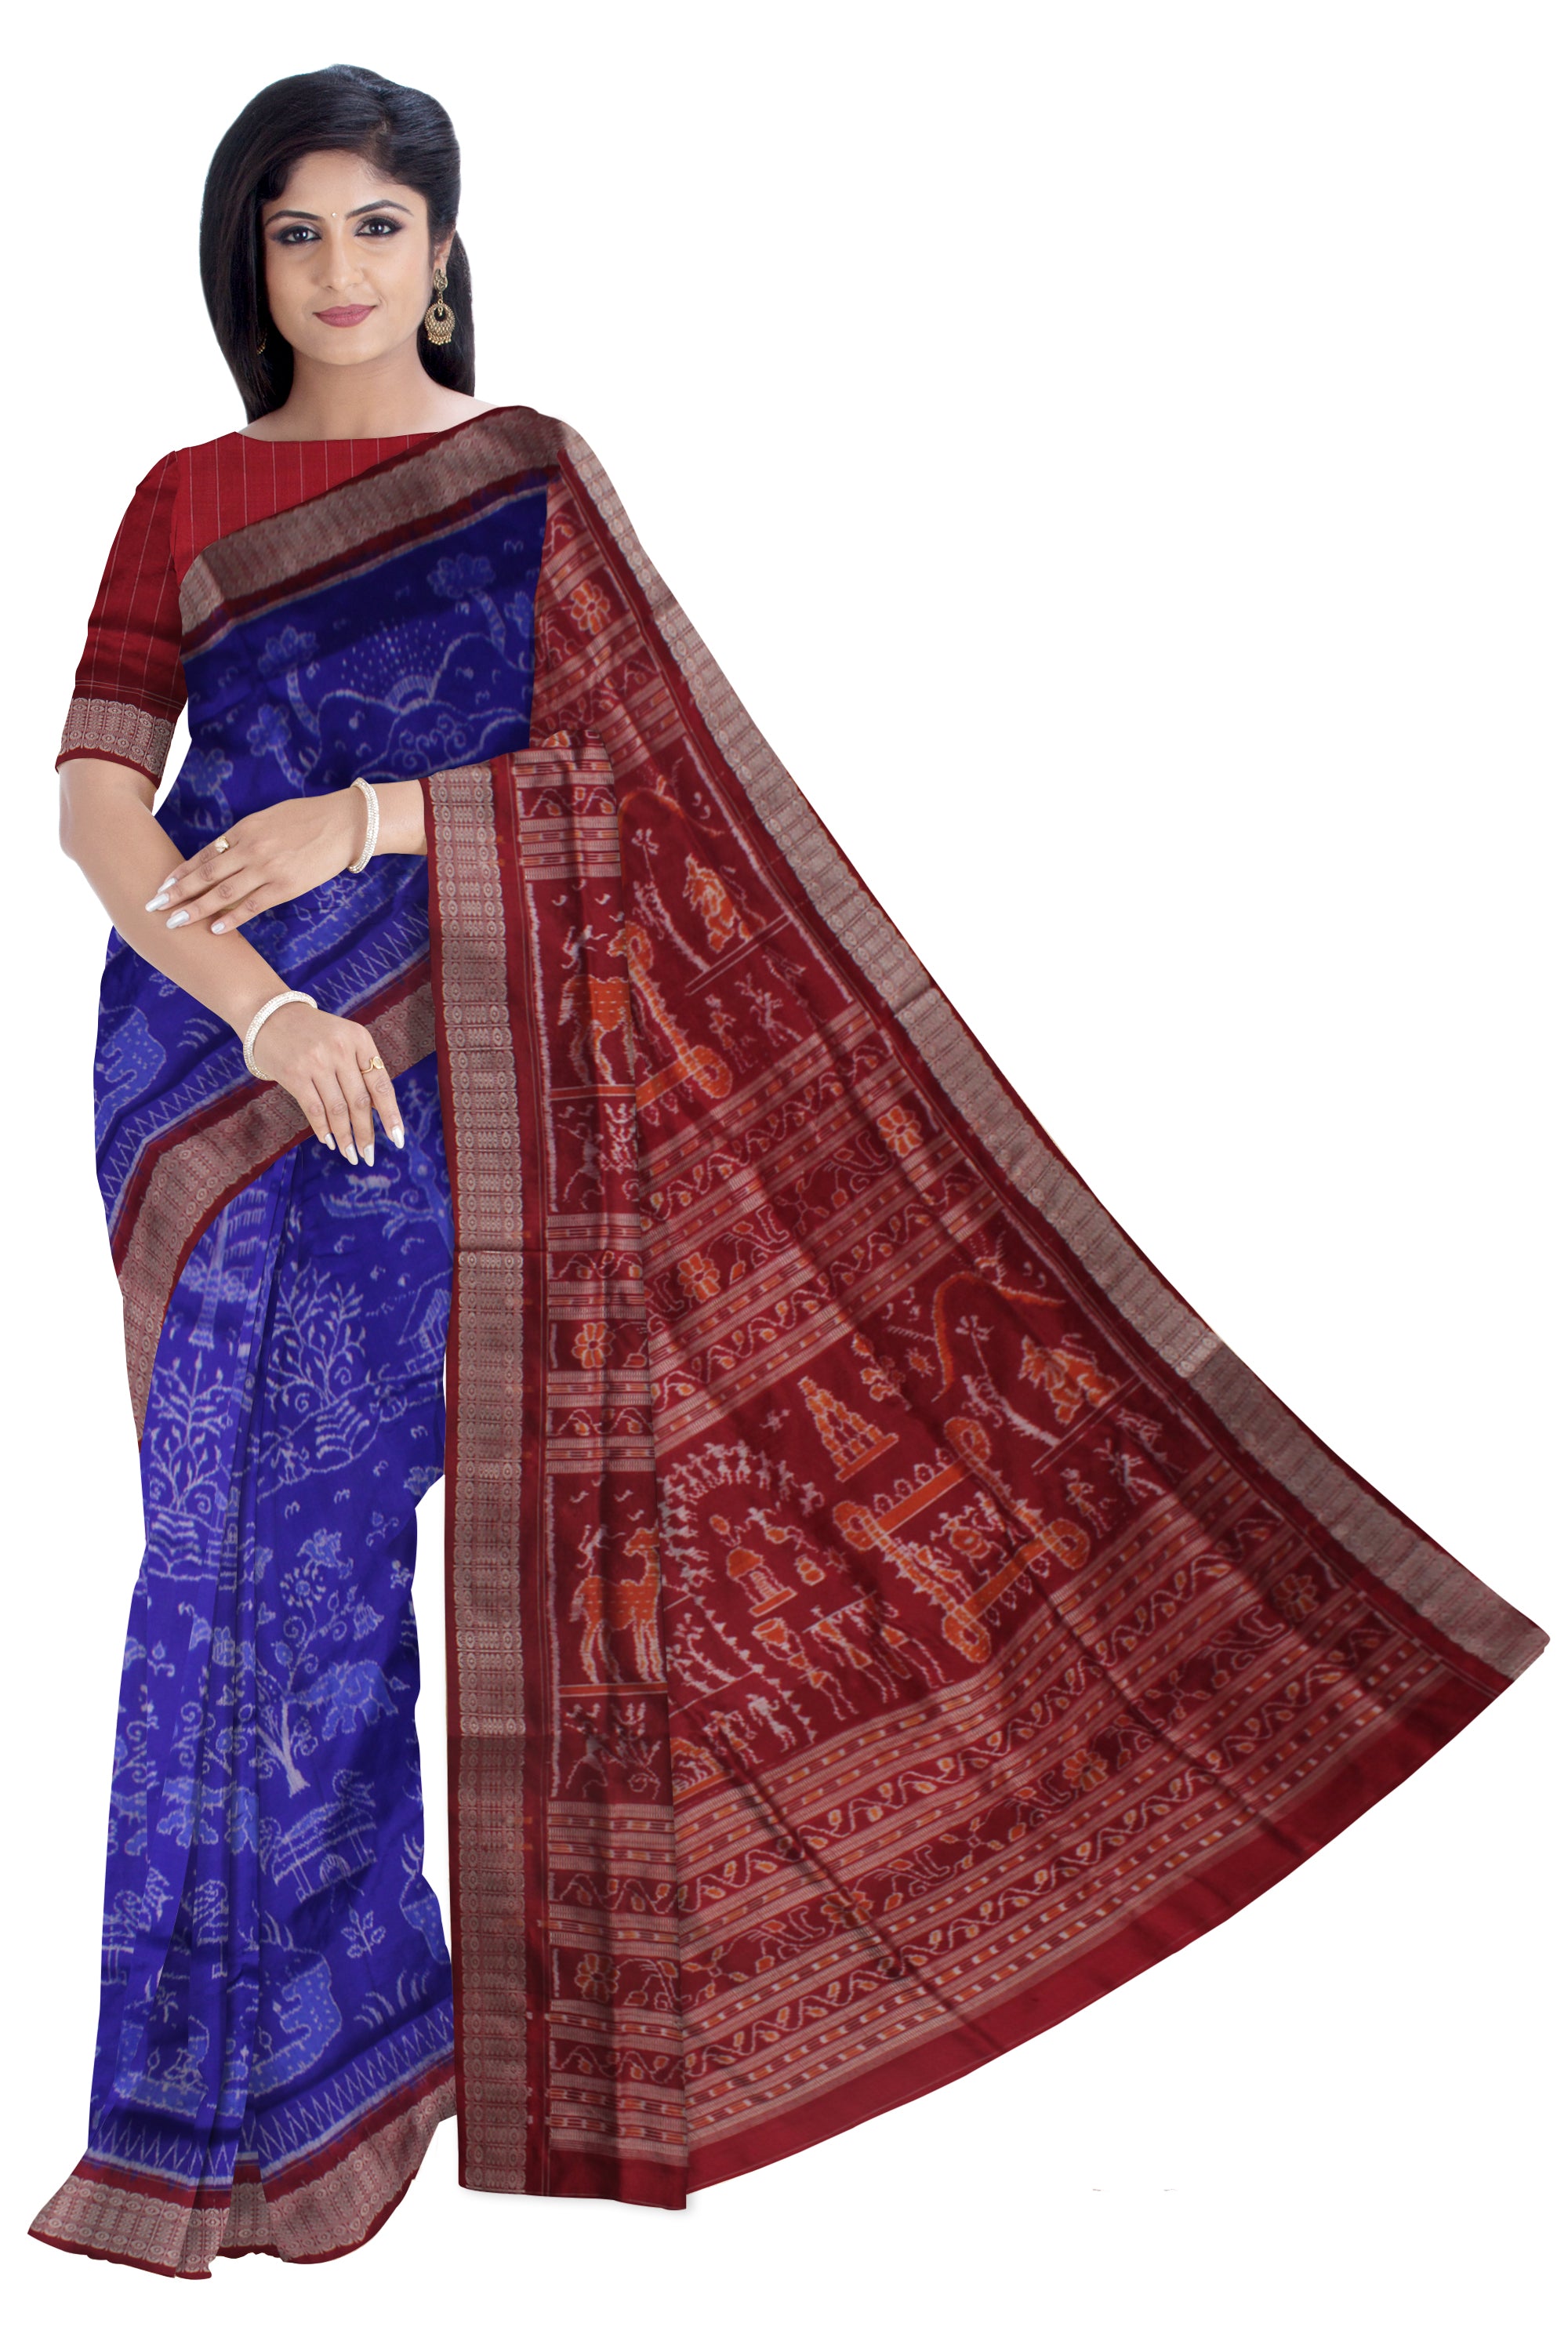 TRADITIONAL VILLAGE PATTERN PURE SILK SAREE IS BLUE AND MAROON COLOR BASE, WITH BLOUSE PIECE. - Koshali Arts & Crafts Enterprise